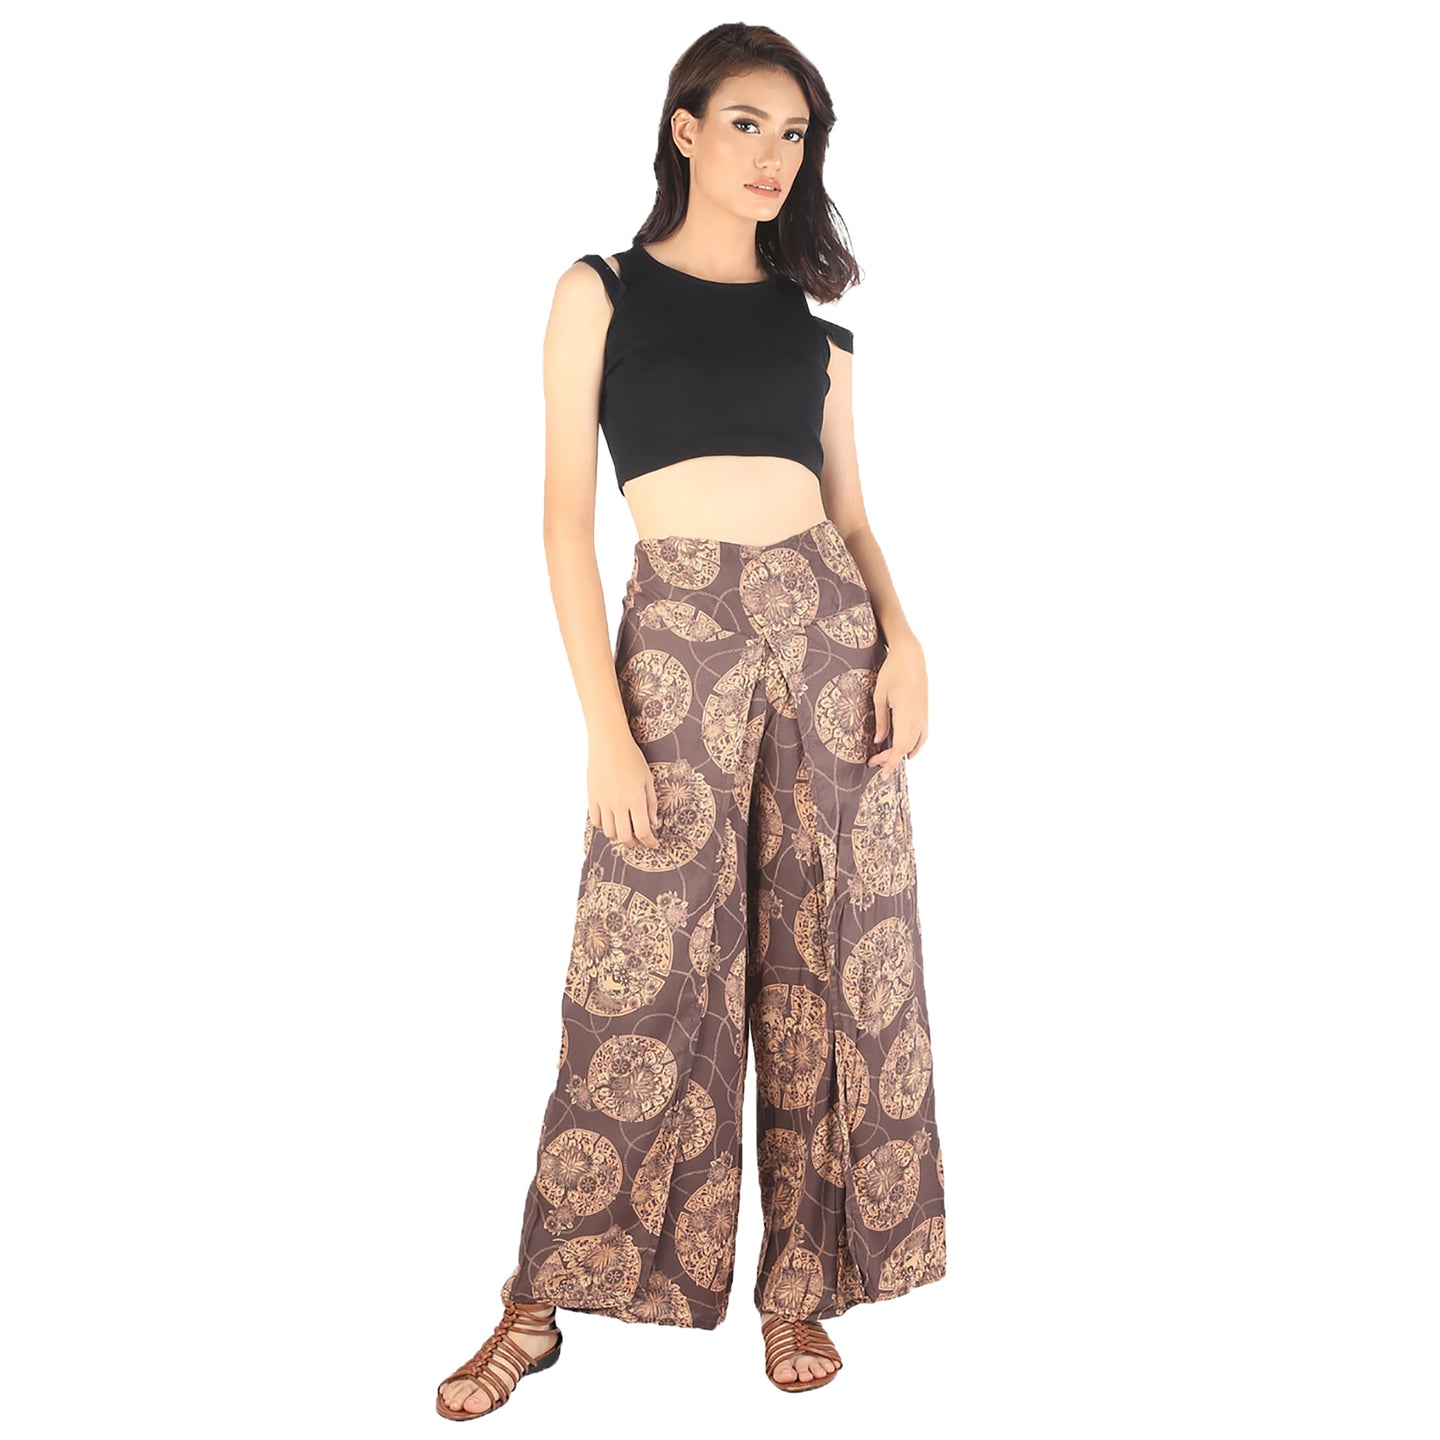 Floral Classic Women Palazzo pants in Brown PP0076 020098 01